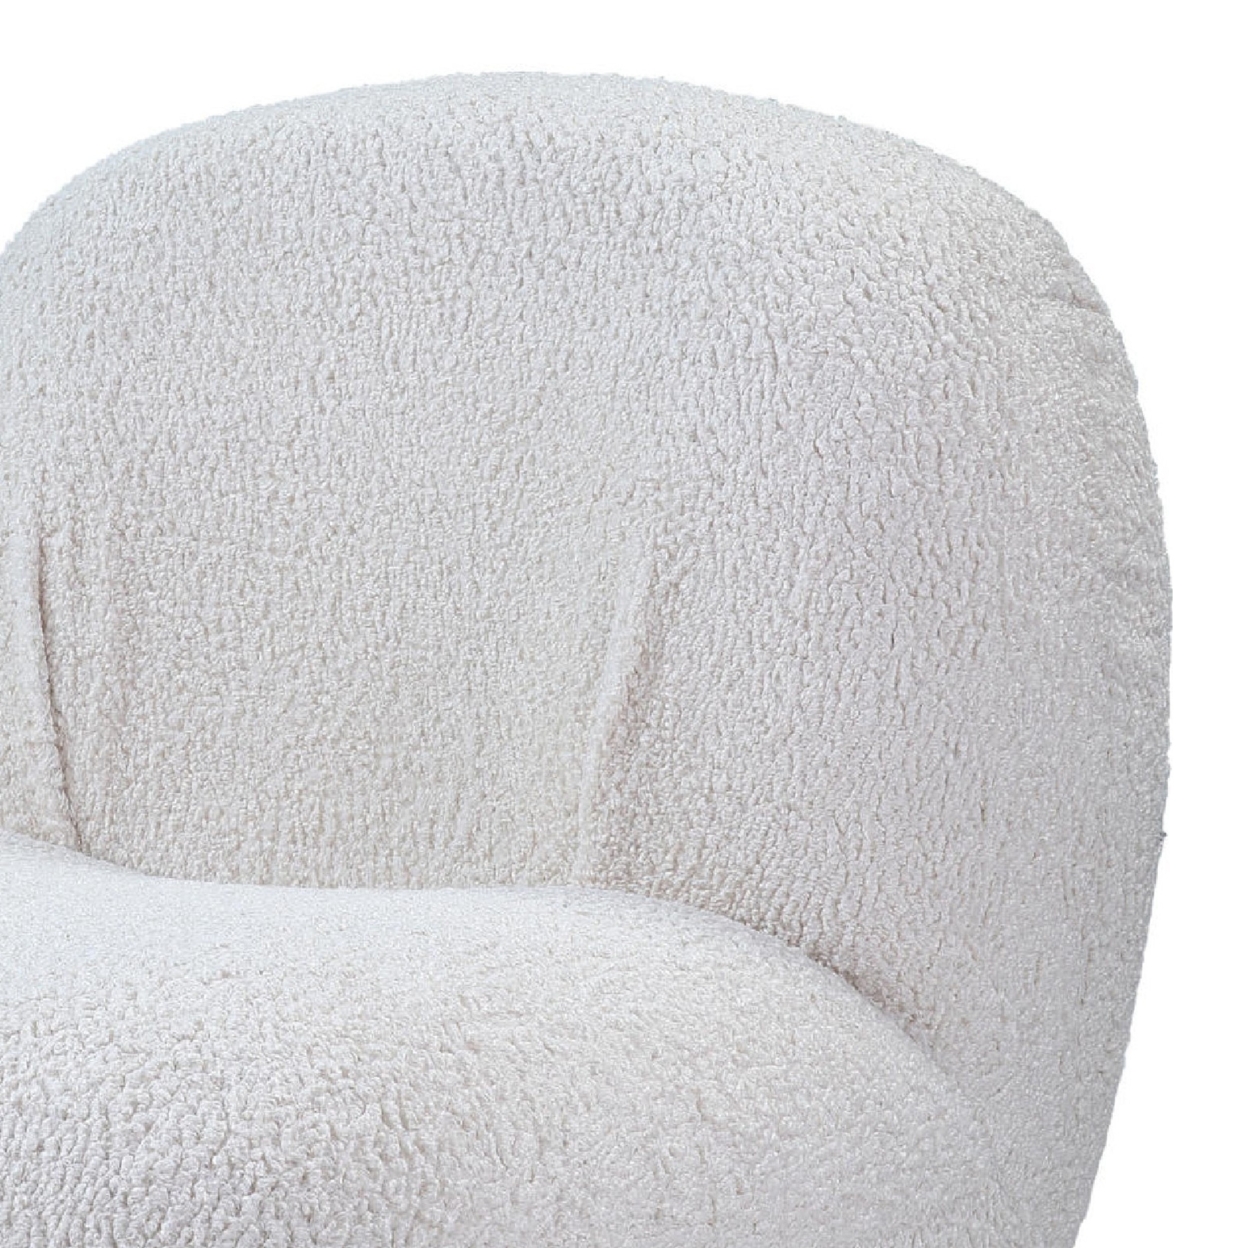 27 Inch Teddy Sherpa Fabric Curved Accent Chair, Swivel Function, White- Saltoro Sherpi